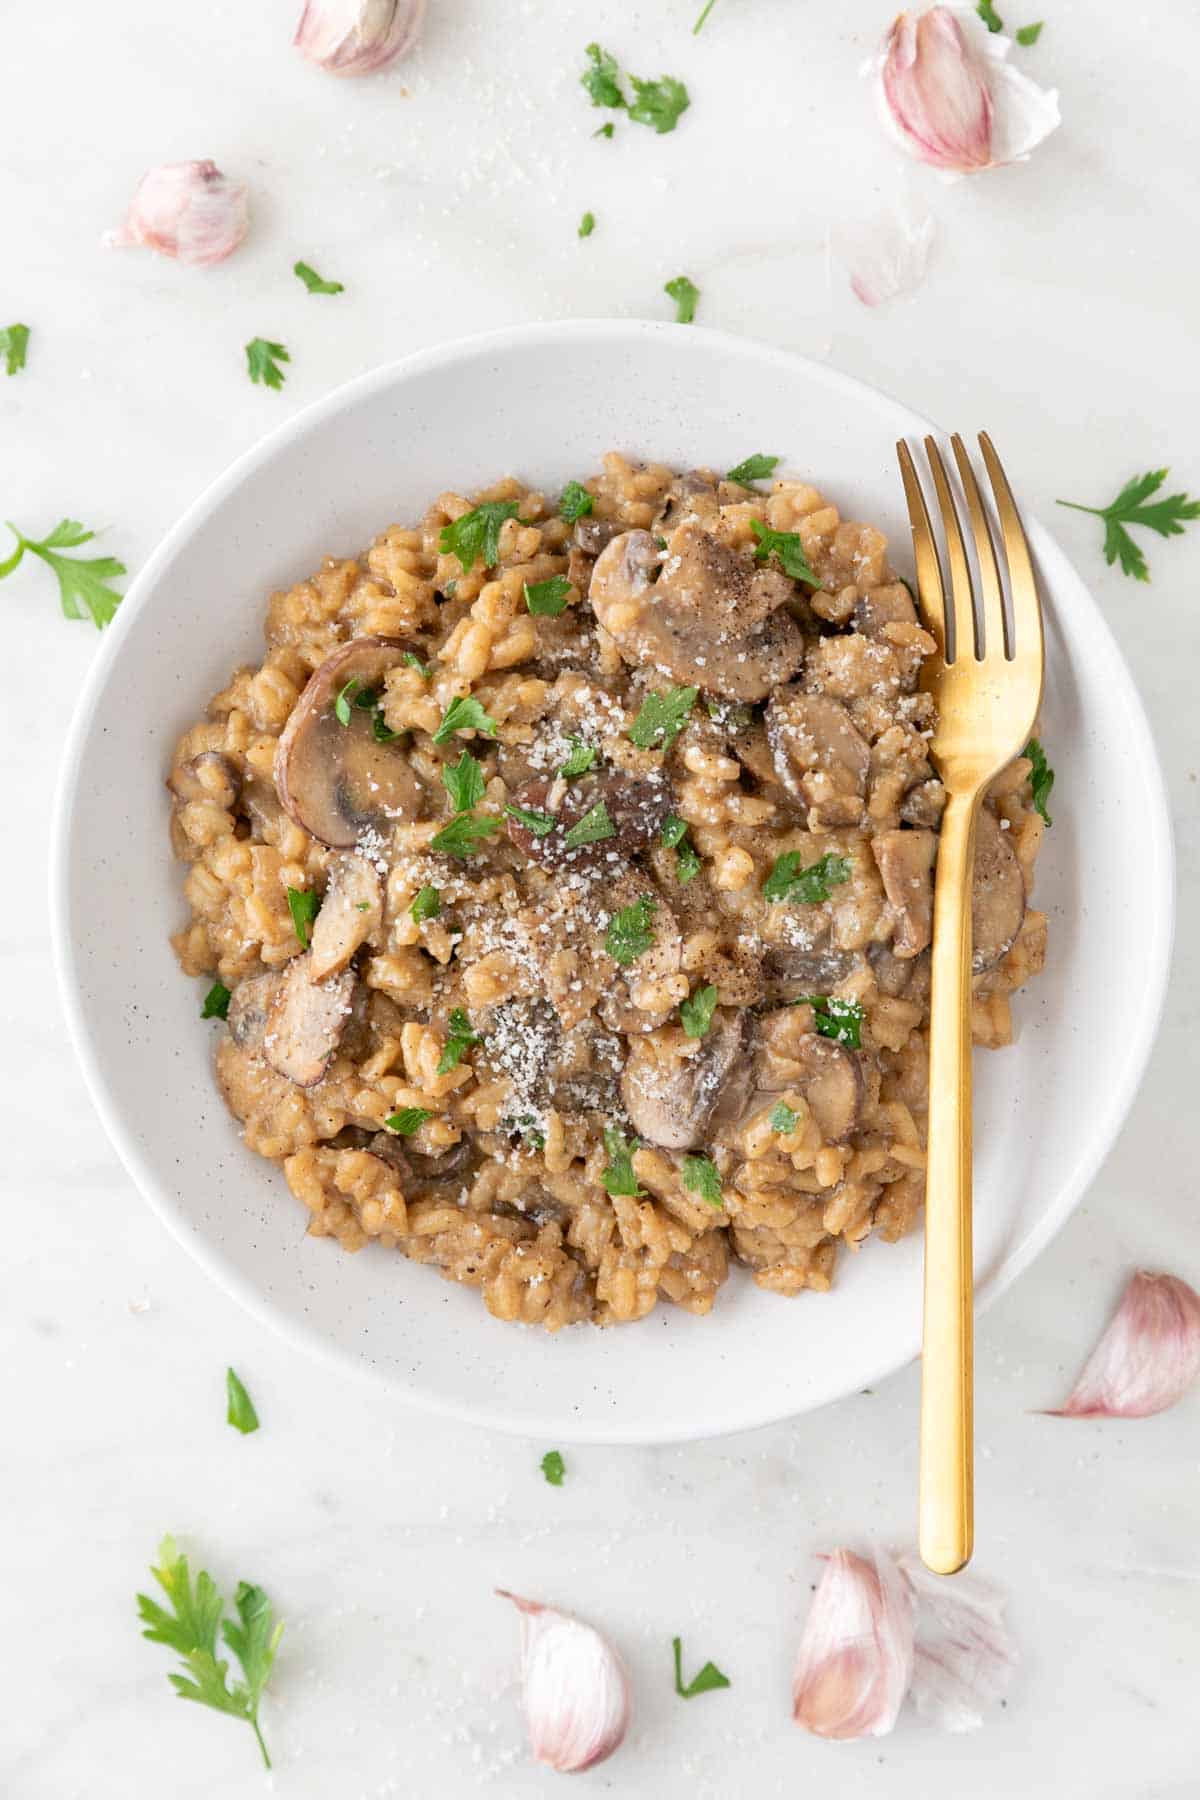 Vegan mushroom risotto on a plate with a fork.